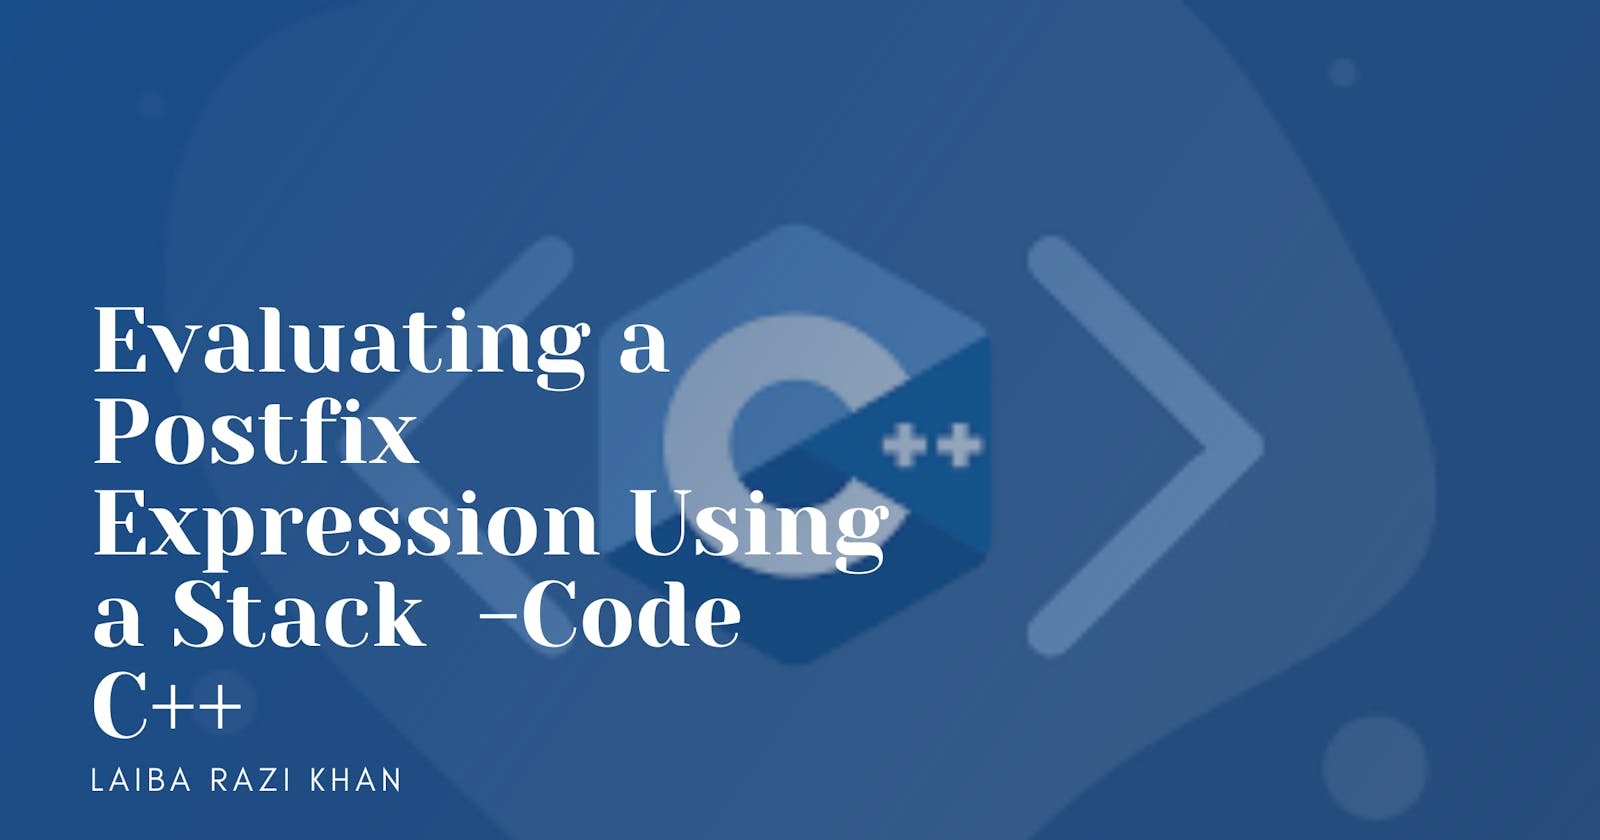 Evaluating a Postfix Expression Using a Stack  -Code C++